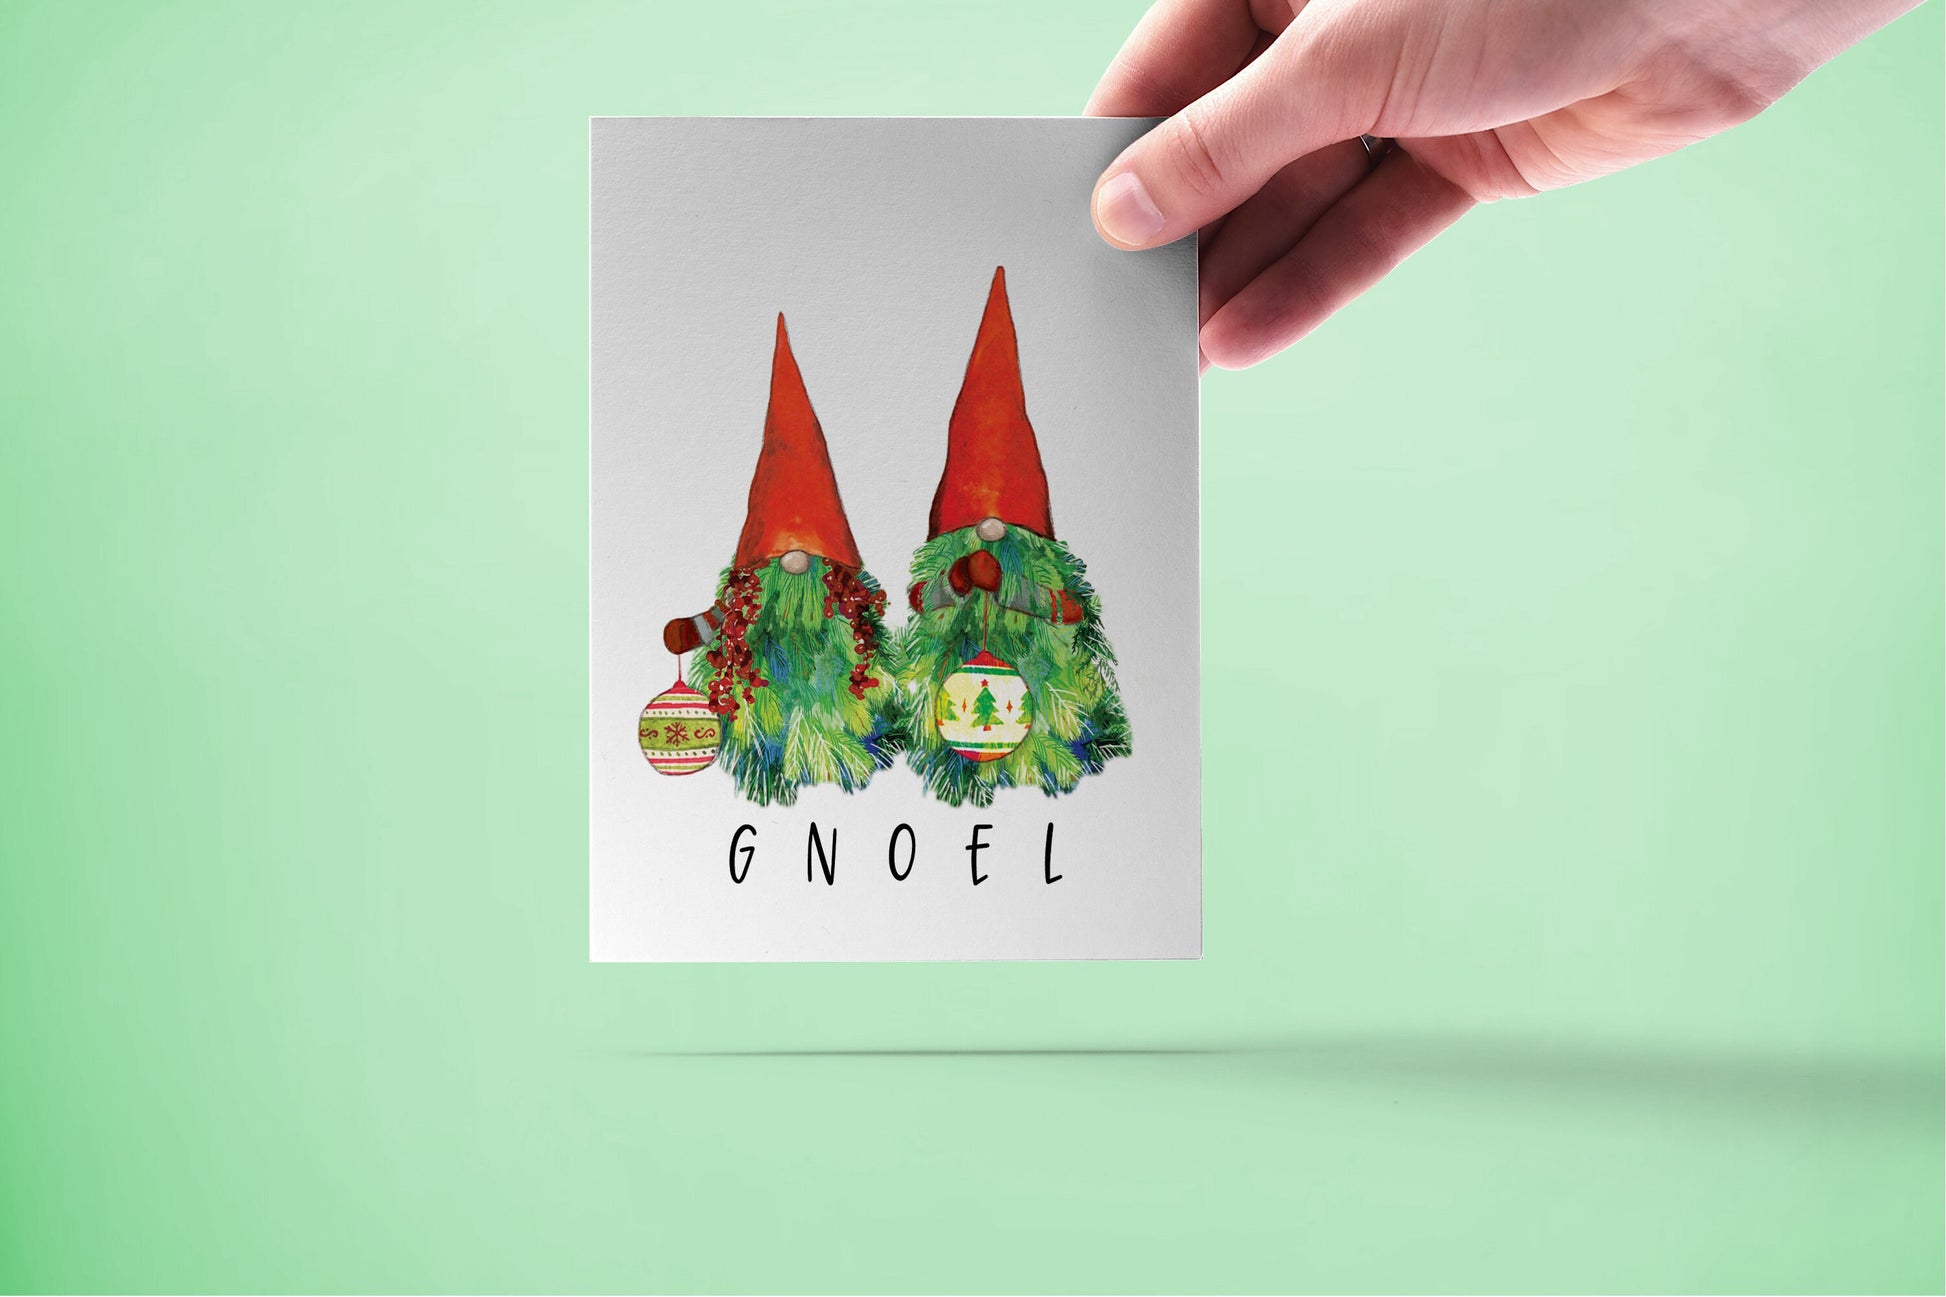 Garden Gnome Christmas Cards Funny - GNOEL Xmas Tree Gomes Gifts For Husband